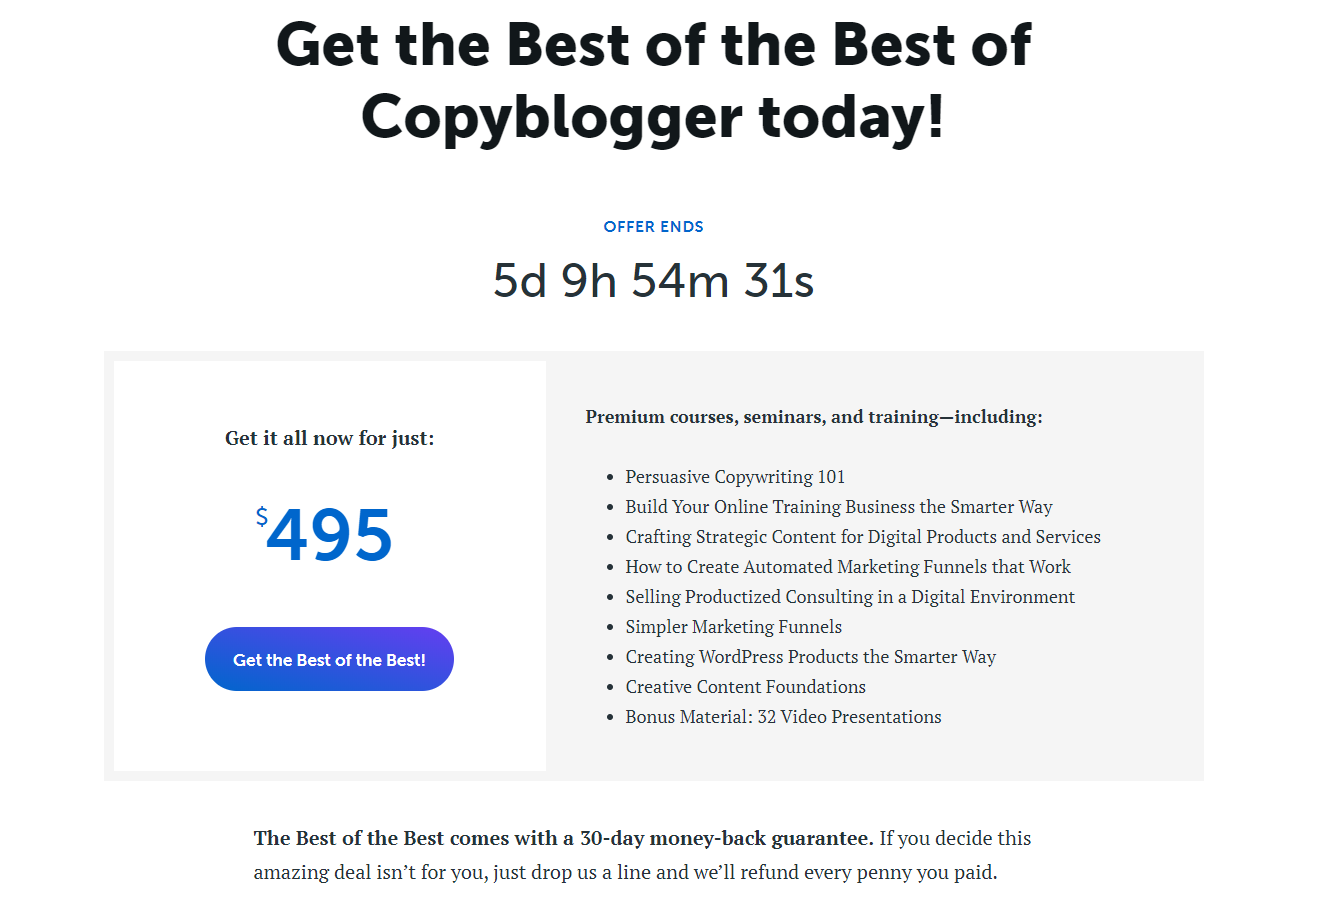 copyblogger's copy is clear thanks to the bullet list